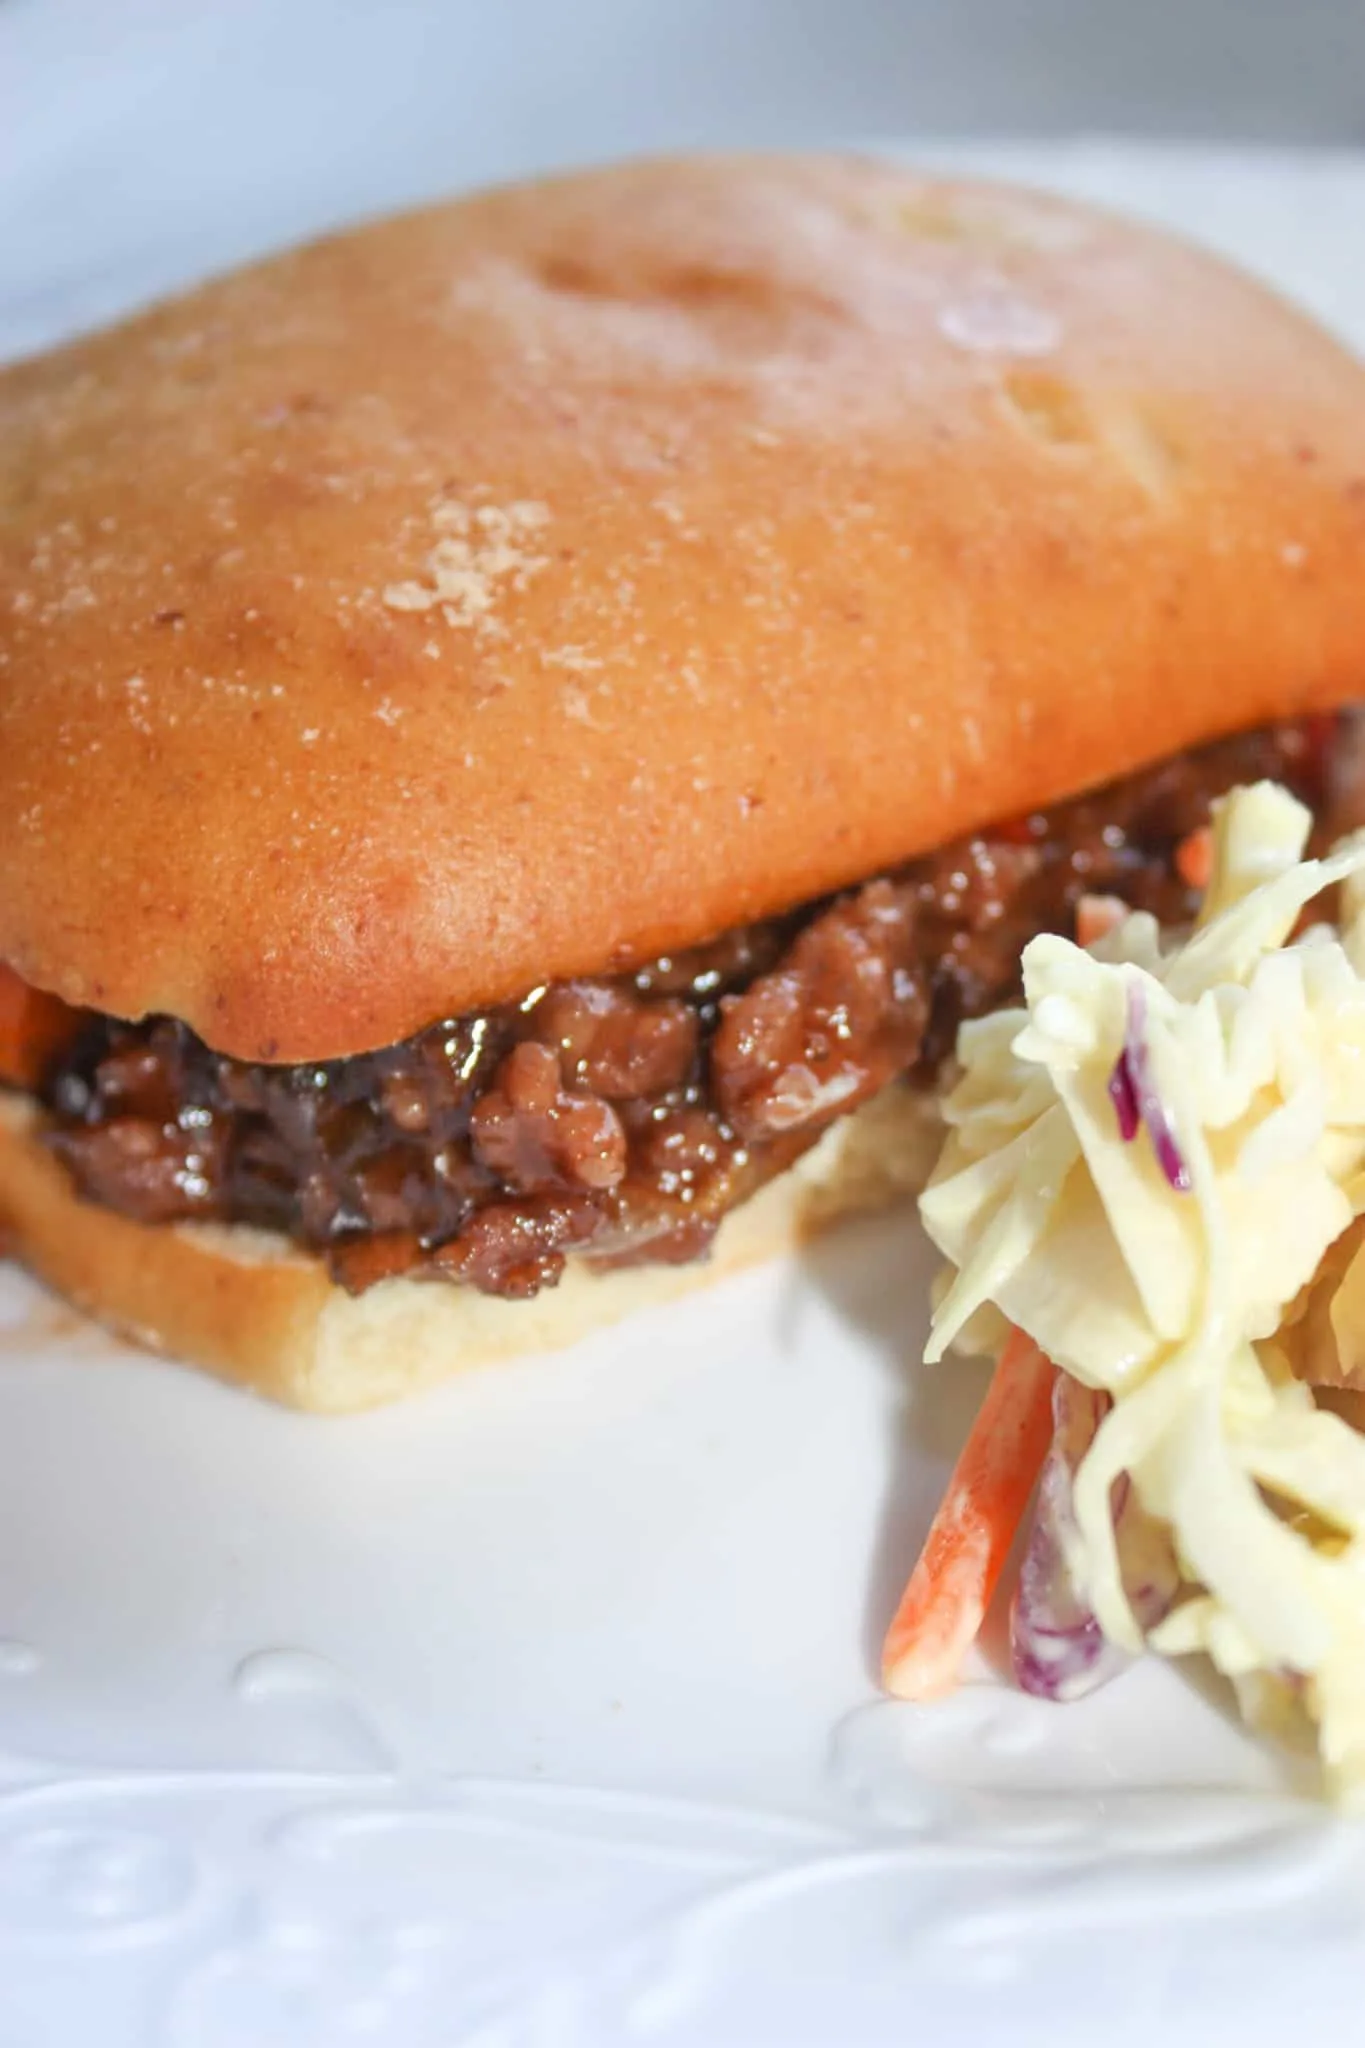 Sloppy Joes are a family favourite.  This time I mixed it up a bit by adding in some extras.  This skillet recipe is loaded with ground beef, vegetables and flavours.  Served on a toasted gluten free bun this well known dinner choice really hit the spot!